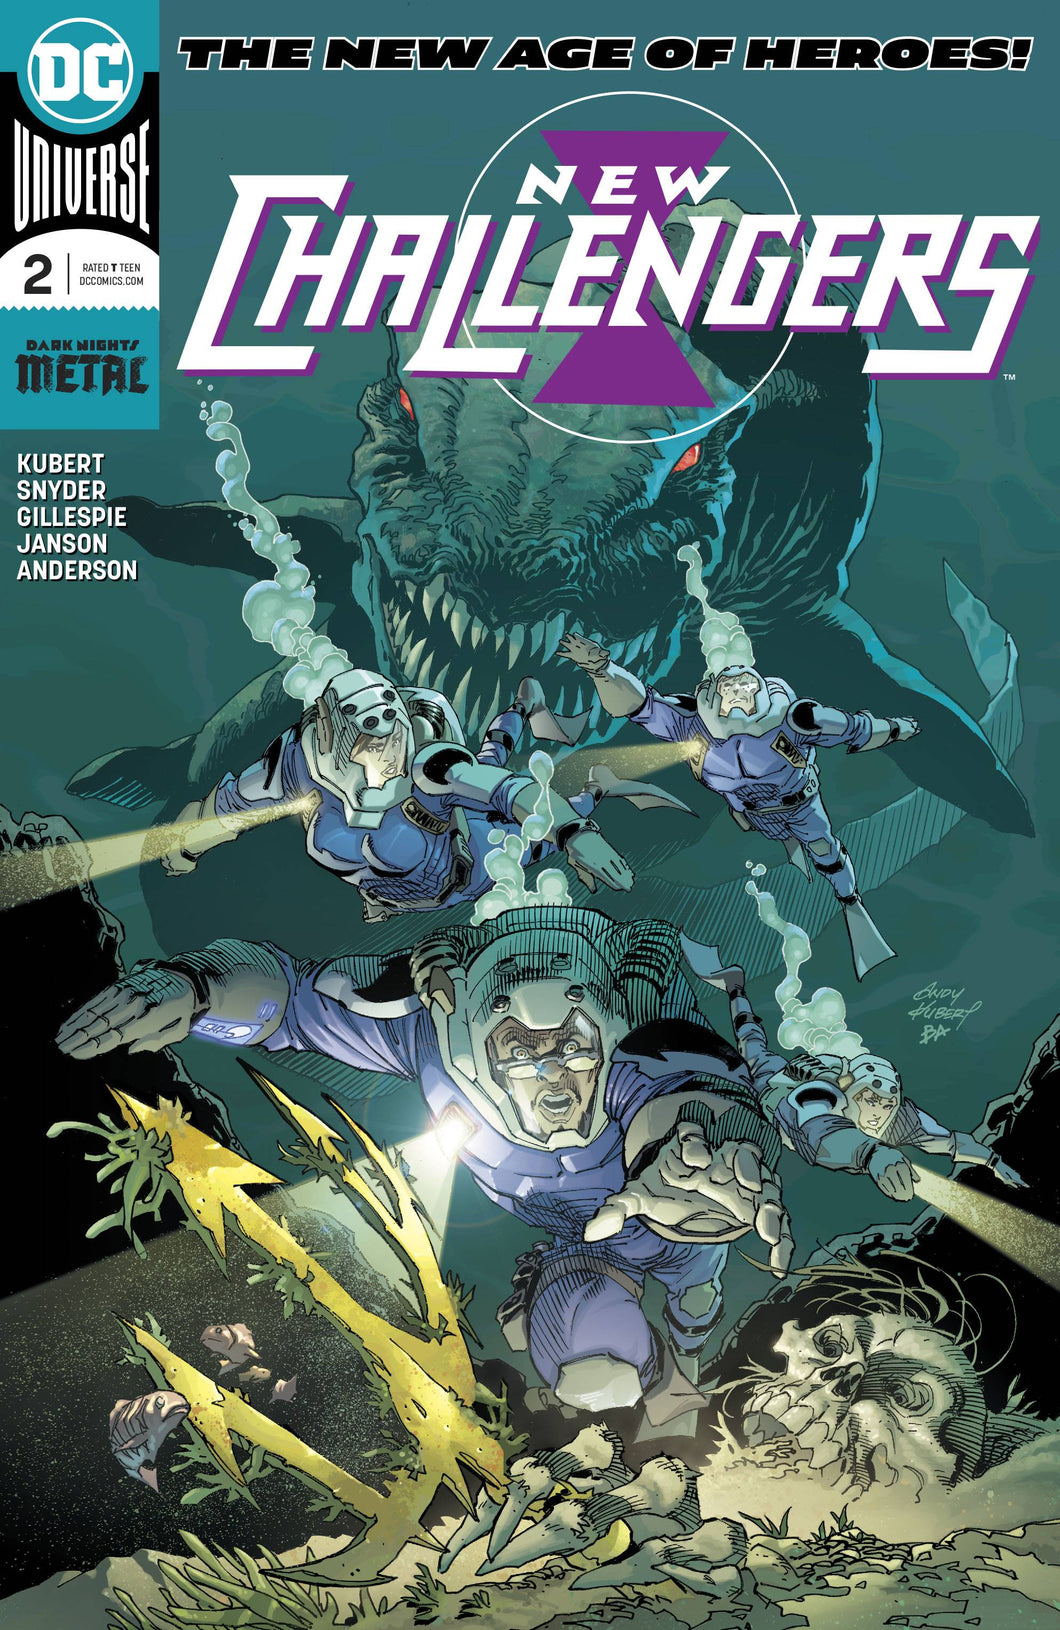 NEW CHALLENGERS #2 (OF 6) (06/20/2018)